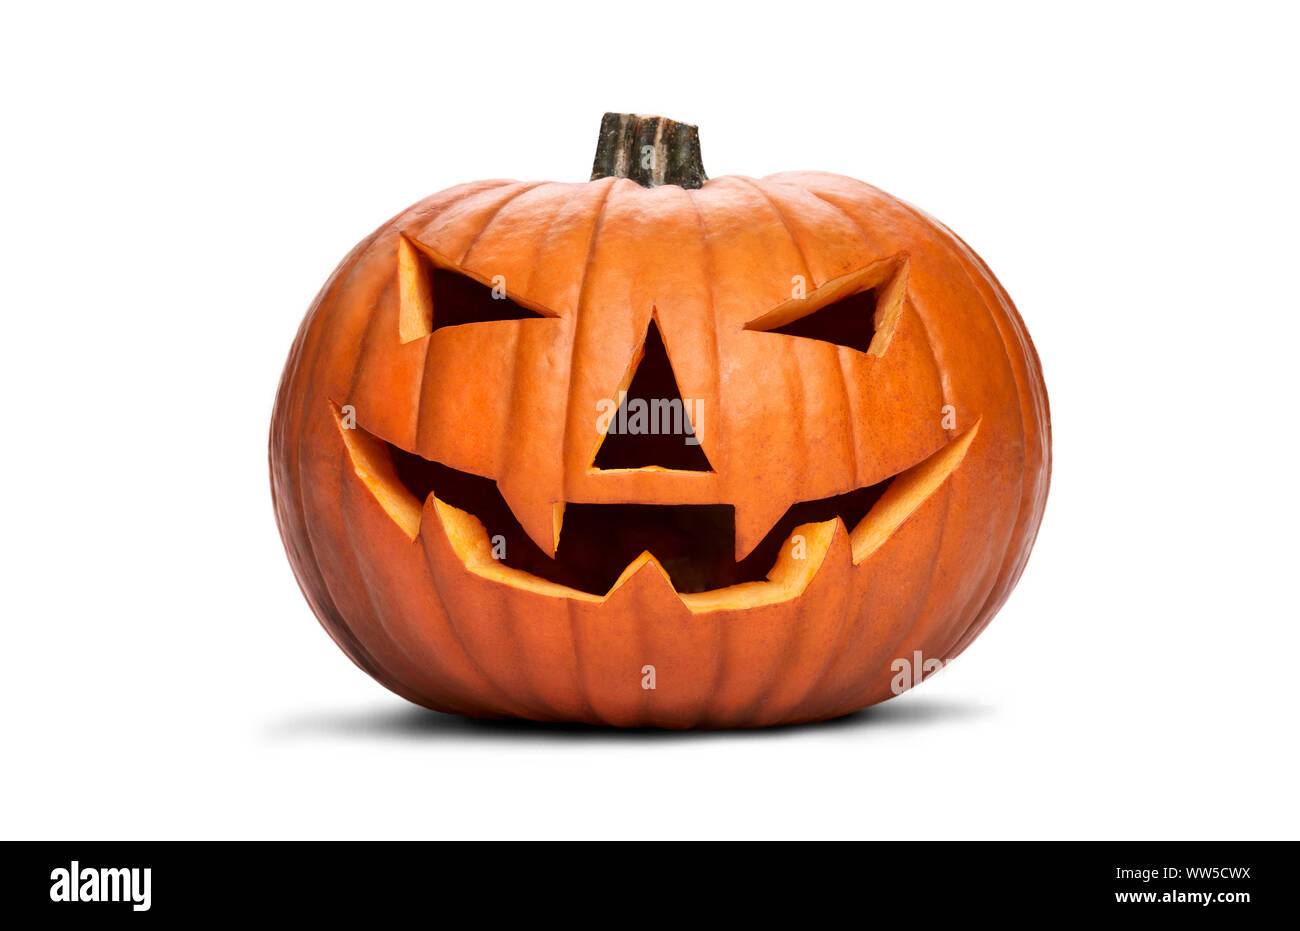 A carved halloween pumpkin with evil eyes and face isolated on white. Stock Photo